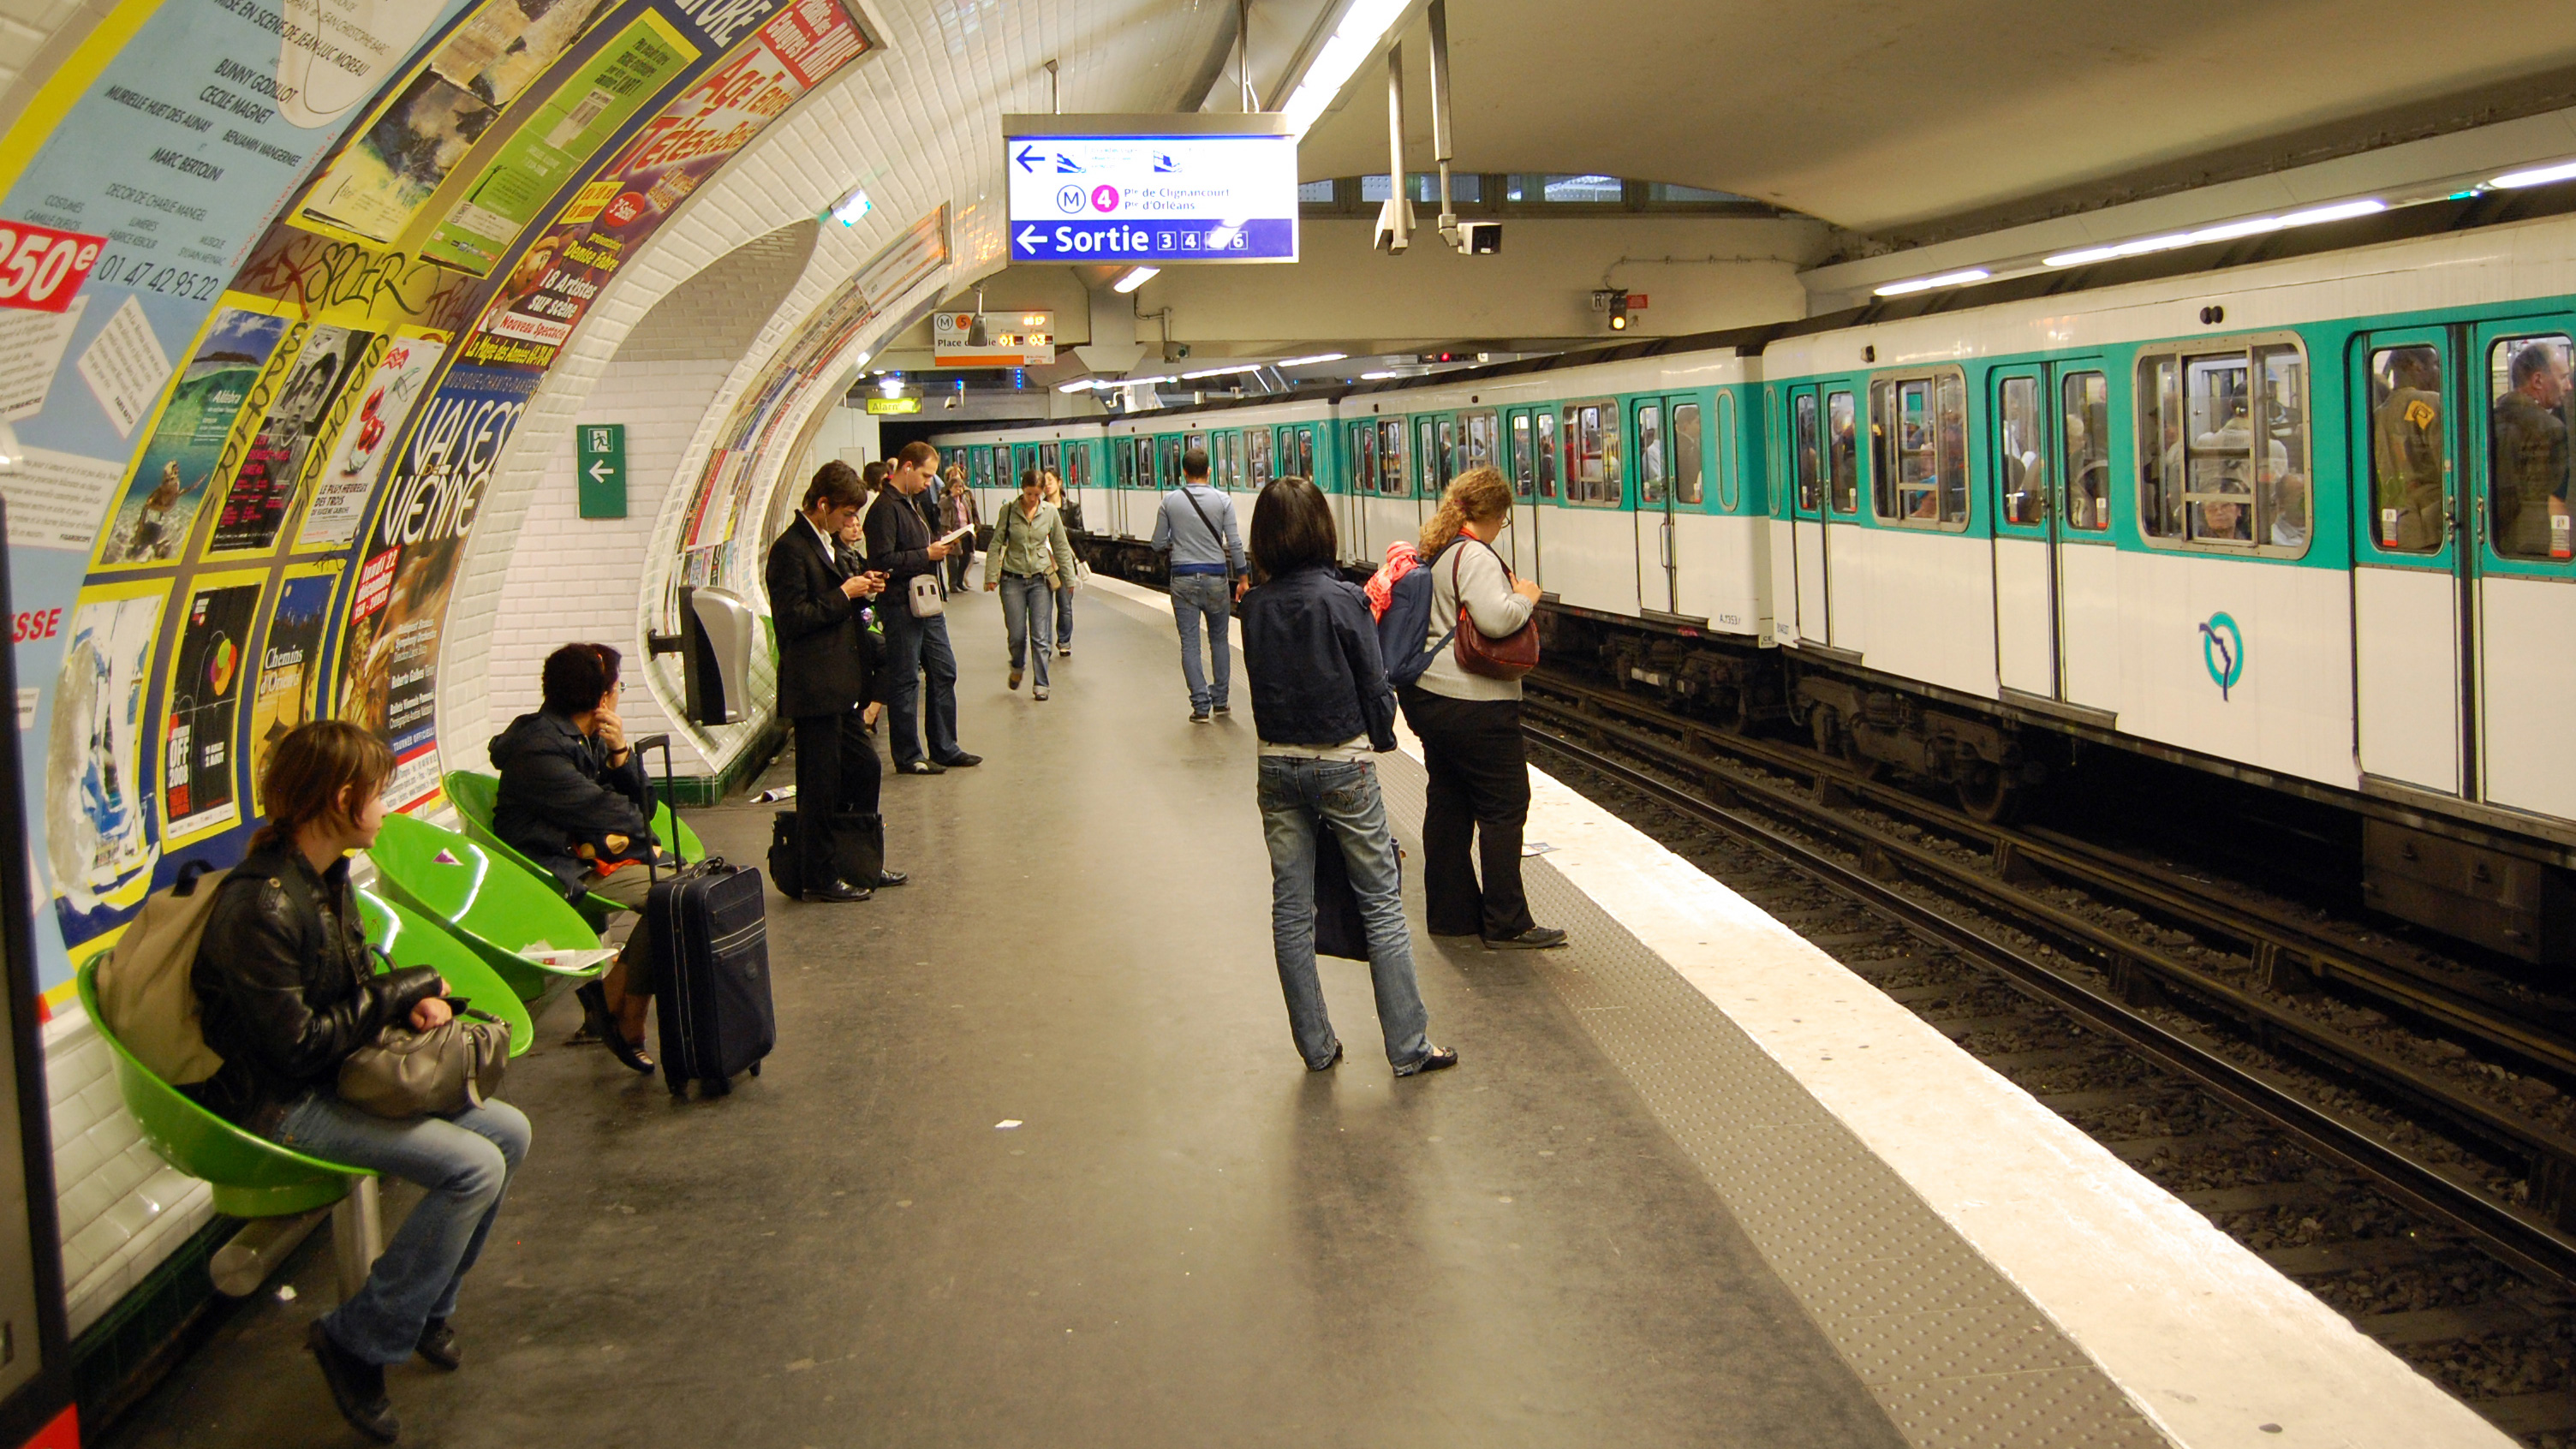 Learning Le Metro: Basic Tips for Paris' Underground Arteries by Rick Steves